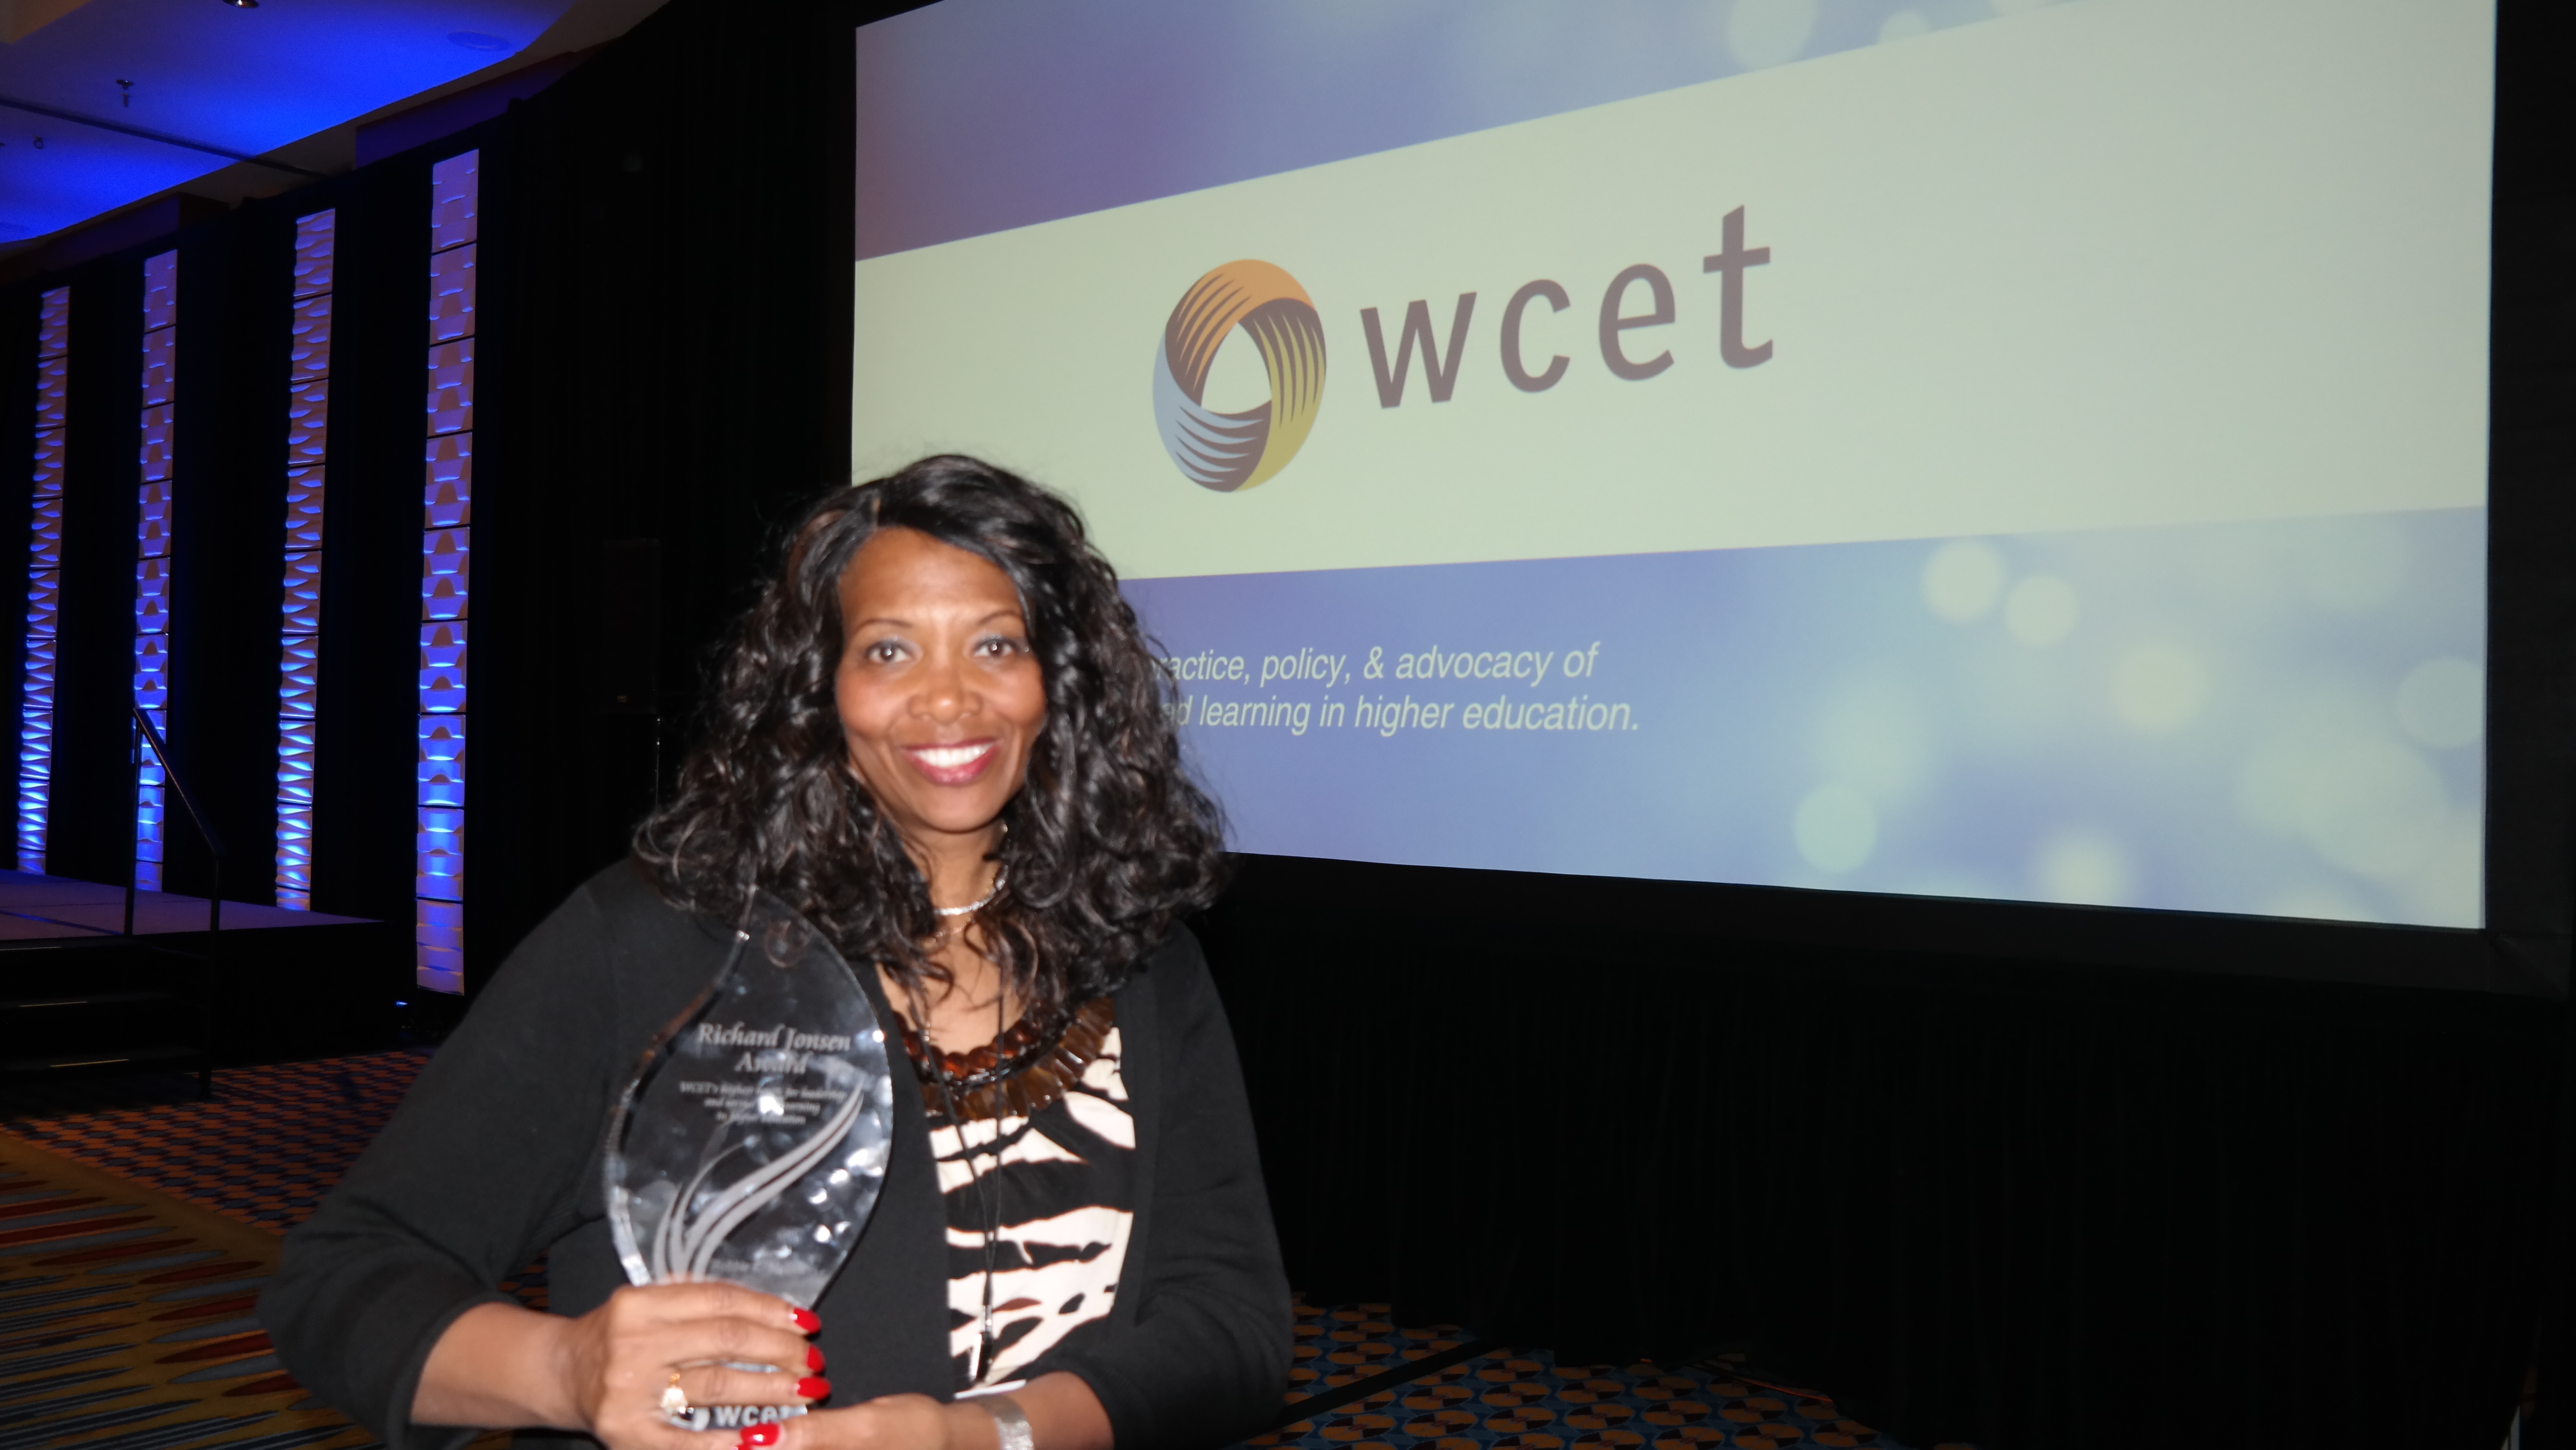 Robbie Melton holding the Richard Jonsen Award in front of a WCET banner